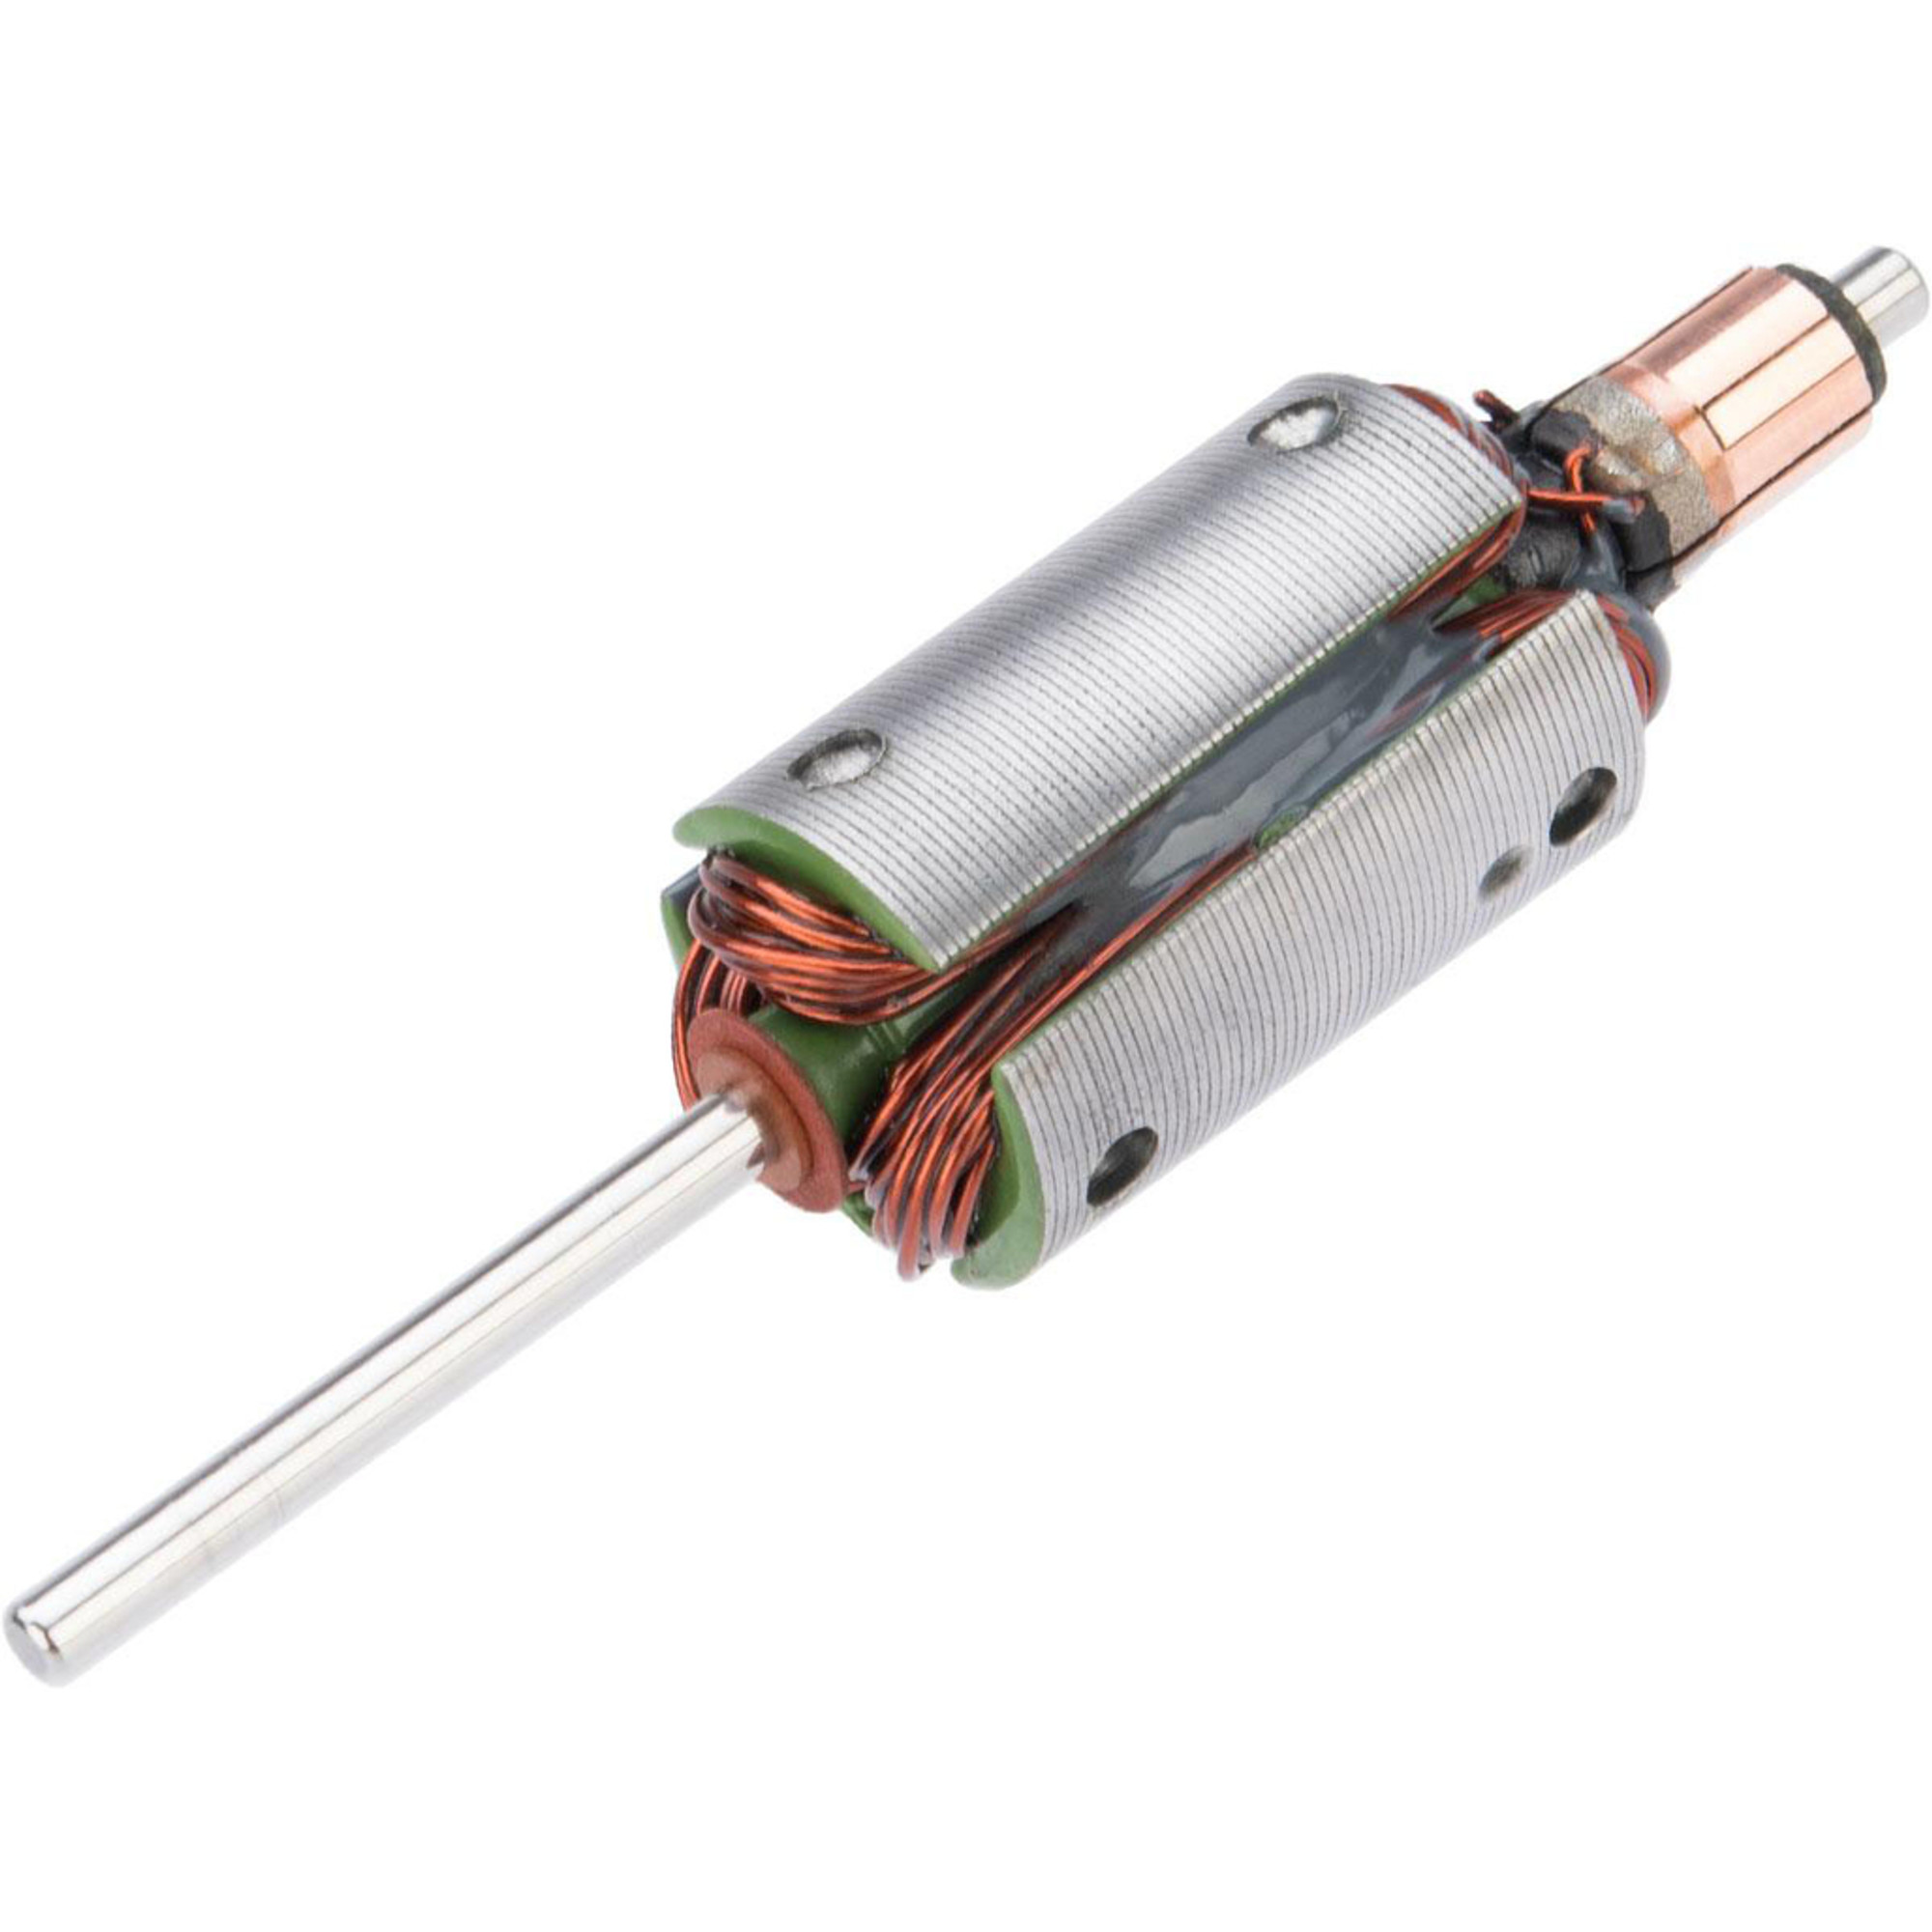 6mmProShop Tienly High Performance Drop-In Armature for Long Type Motor (Type: 40,000 RPM)